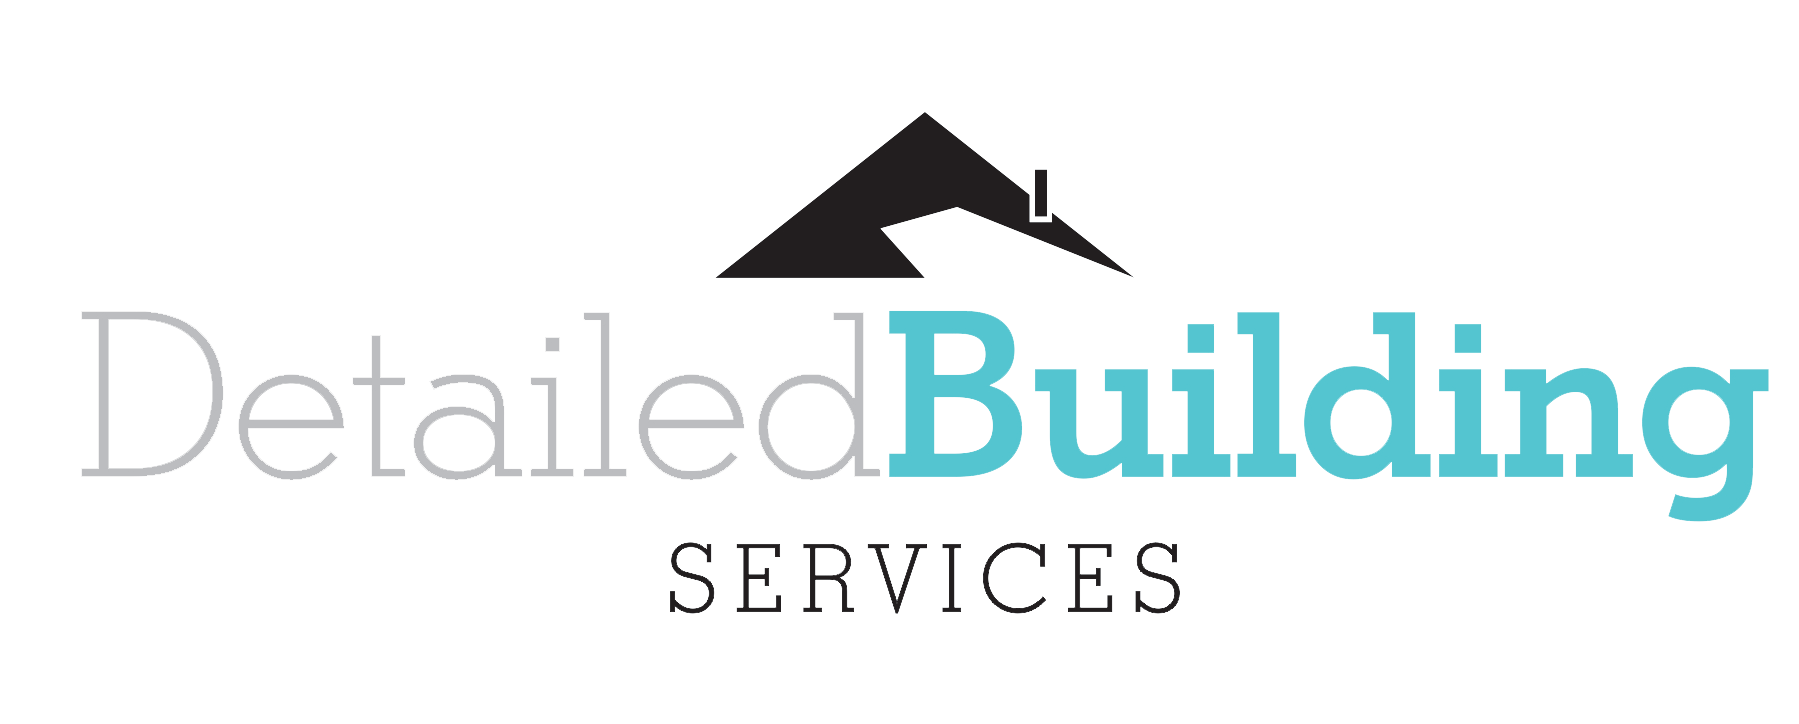 Detailed Building Services